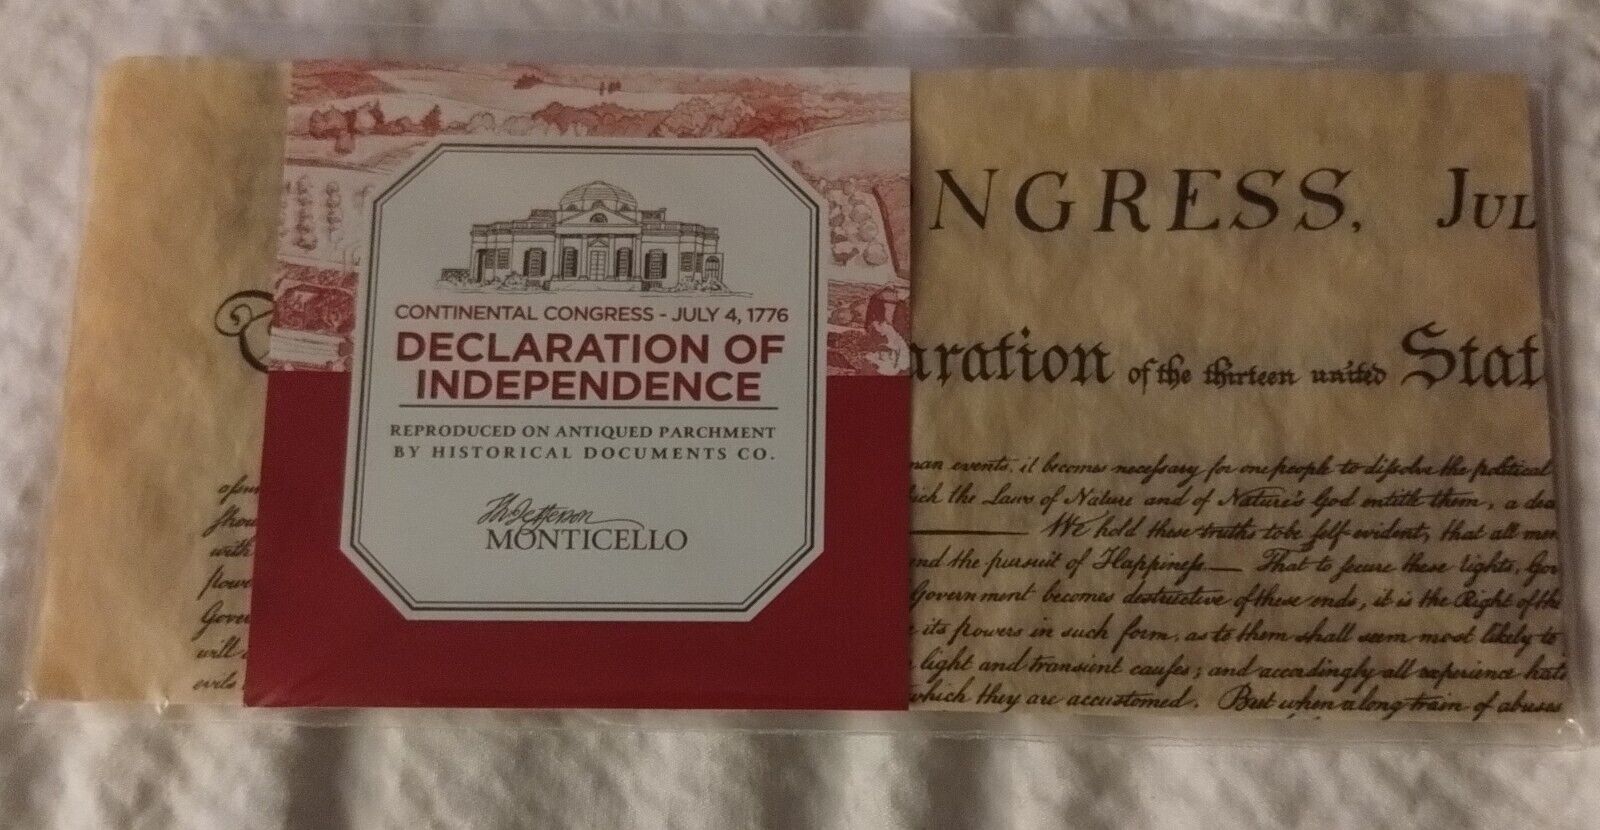 The Jefferson Monticello Declaration of Independence By Historical Documents CO